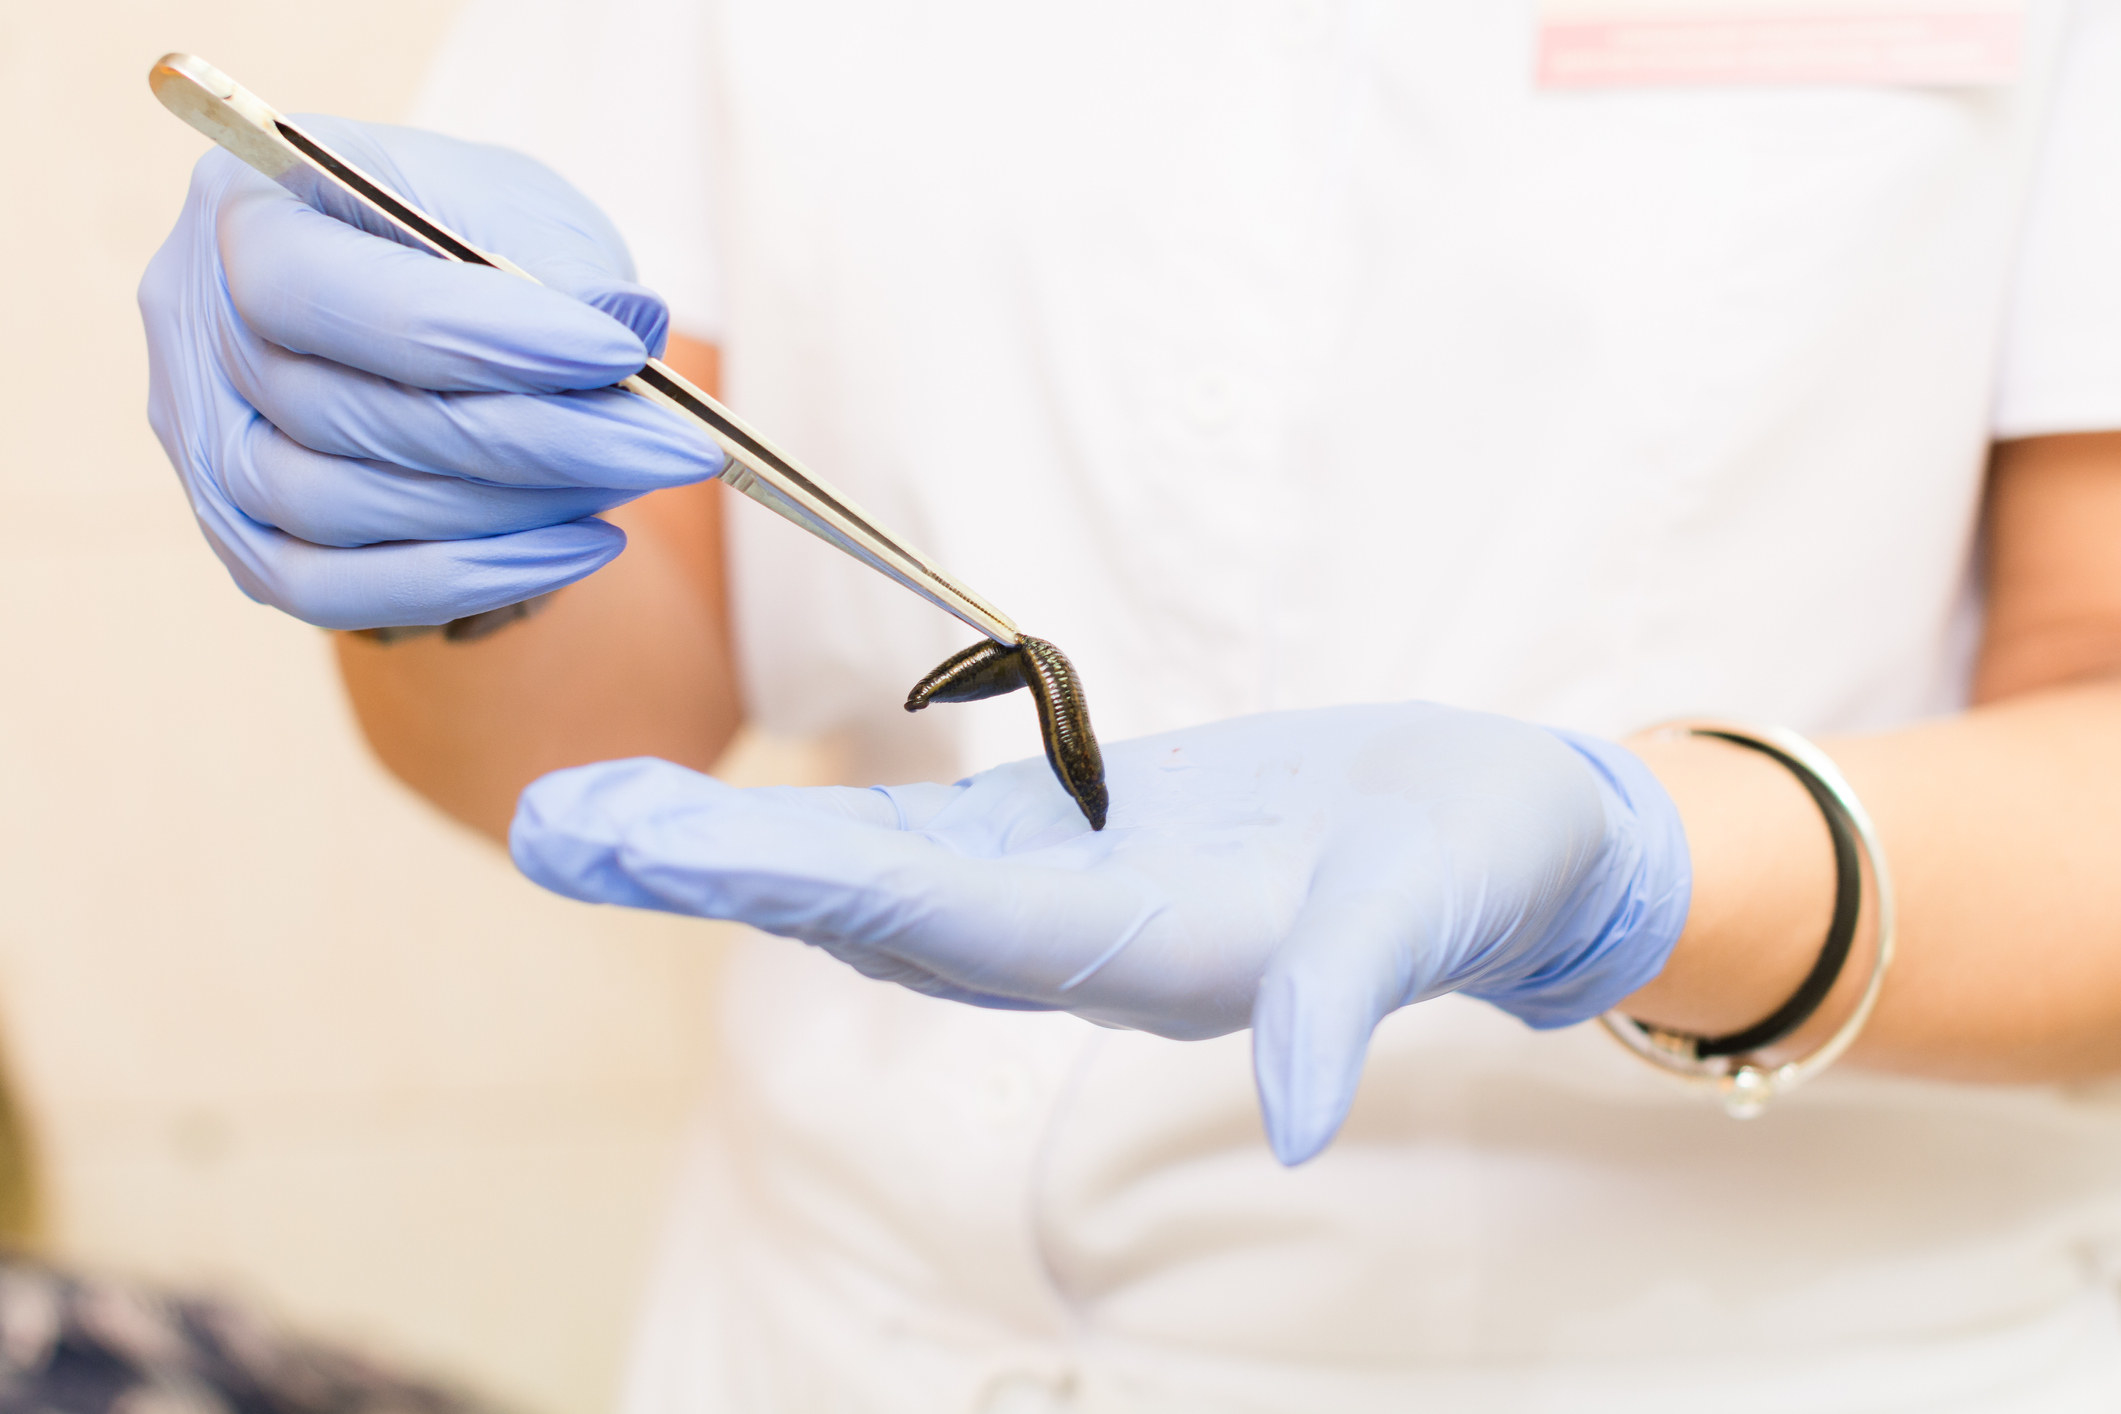 Gloved person picking up a leech with long tweezers